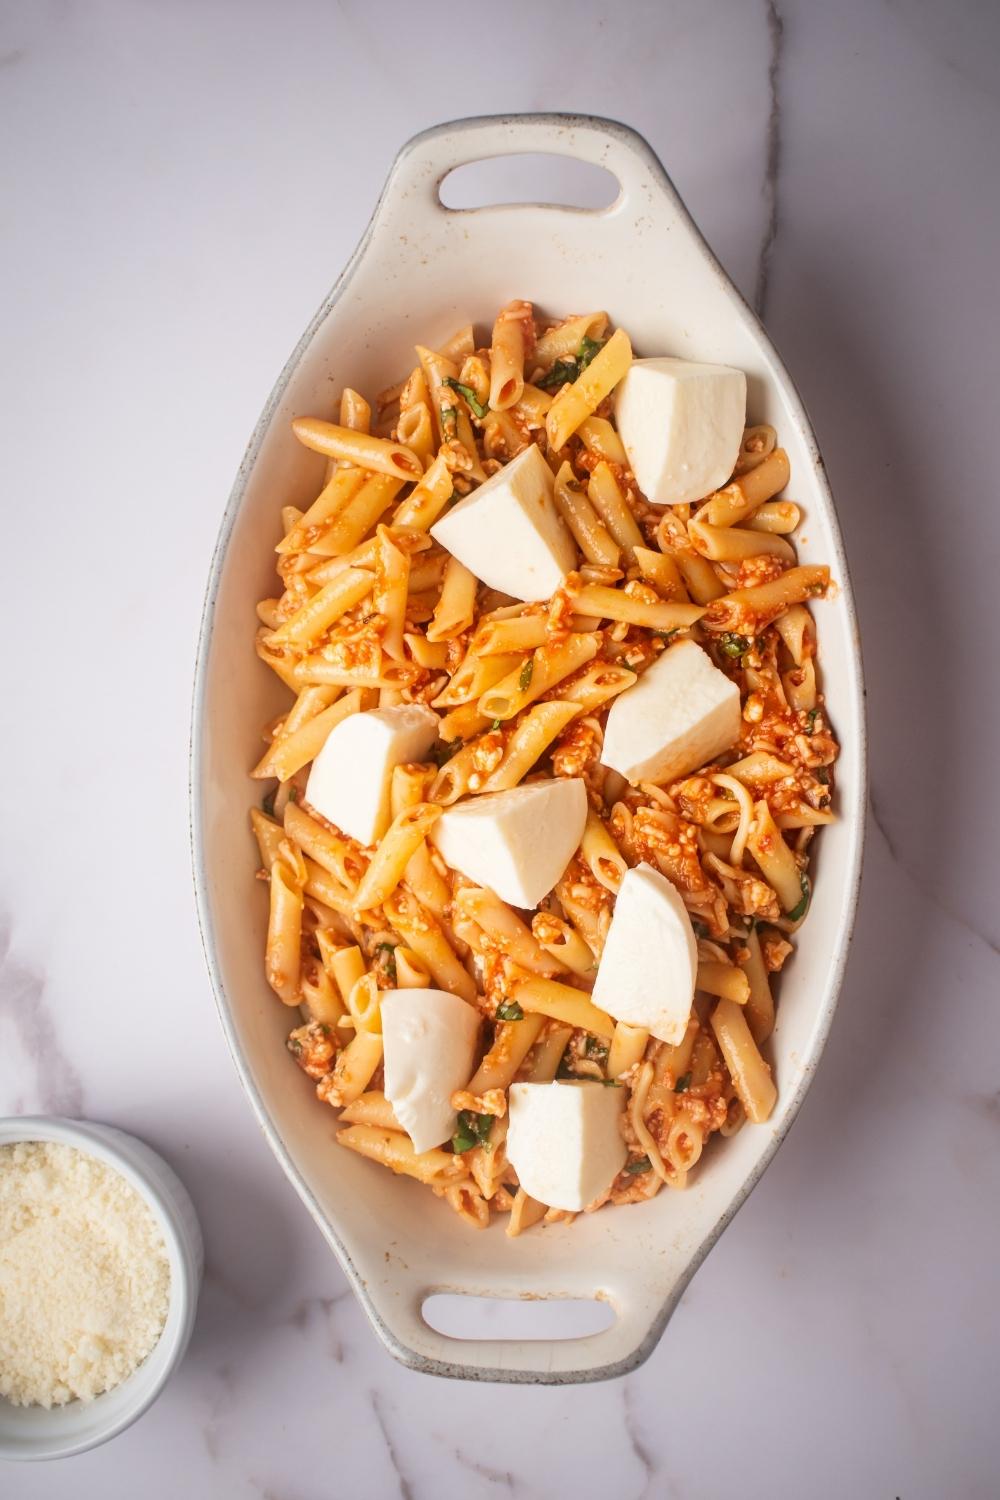 Fresh mozzarella cubes on top of penne pasta in a white baking dish.